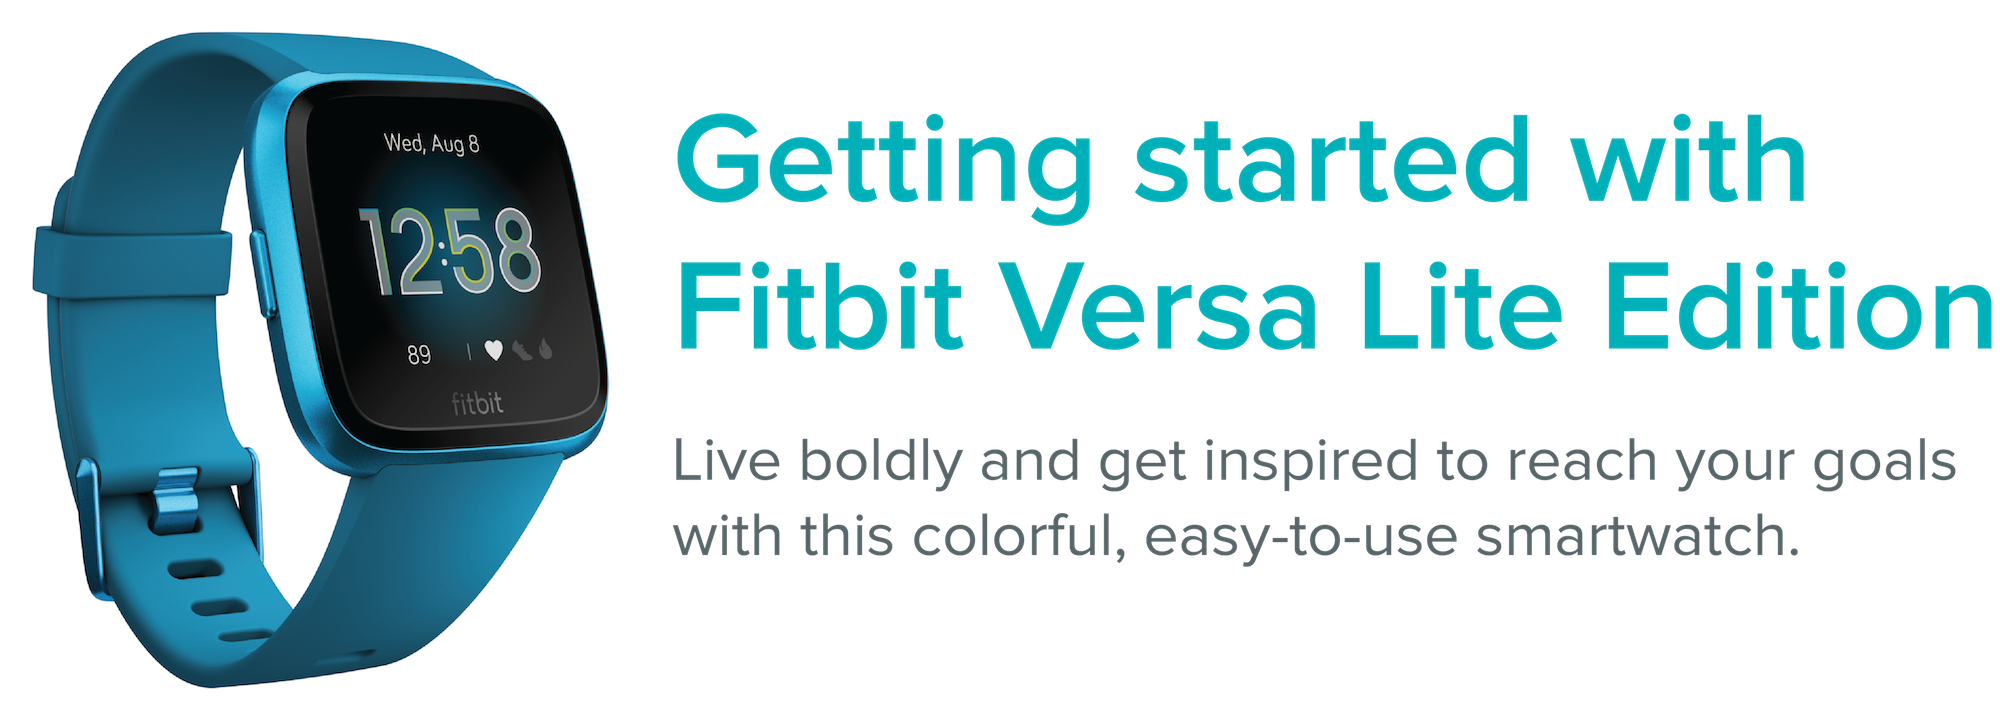 Versa Lite next to the text: Getting started with Fitbit Versa Lite Edition. Live boldly and get inspired to reach your goals with this colorful, easy-to-use smartwatch.